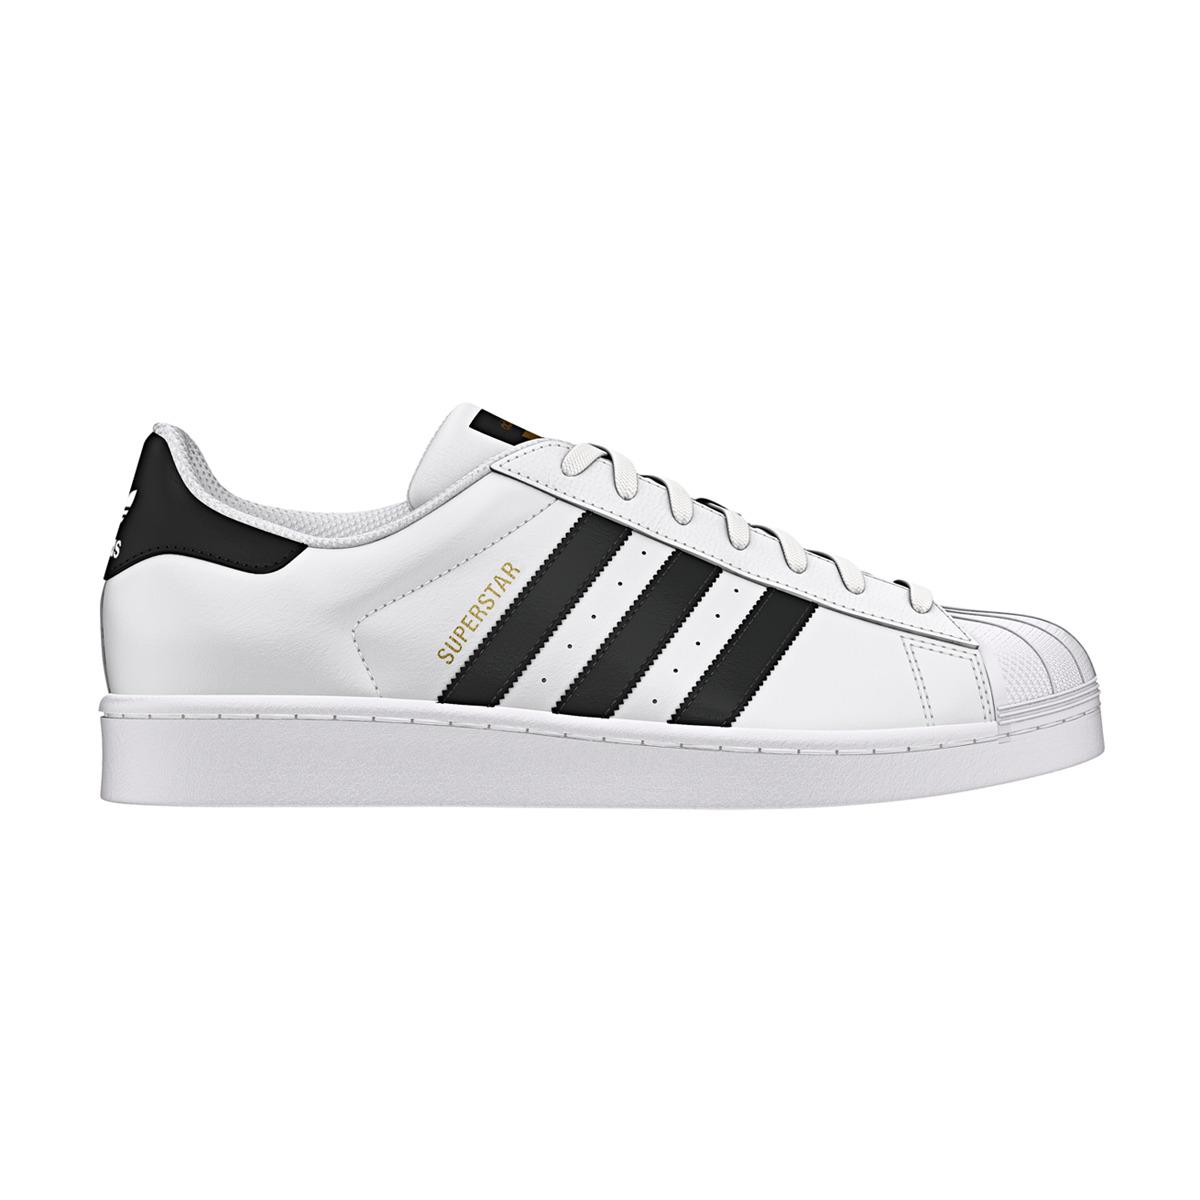 Lyst - Adidas Originals Superstar Casual Trainers in White for Men